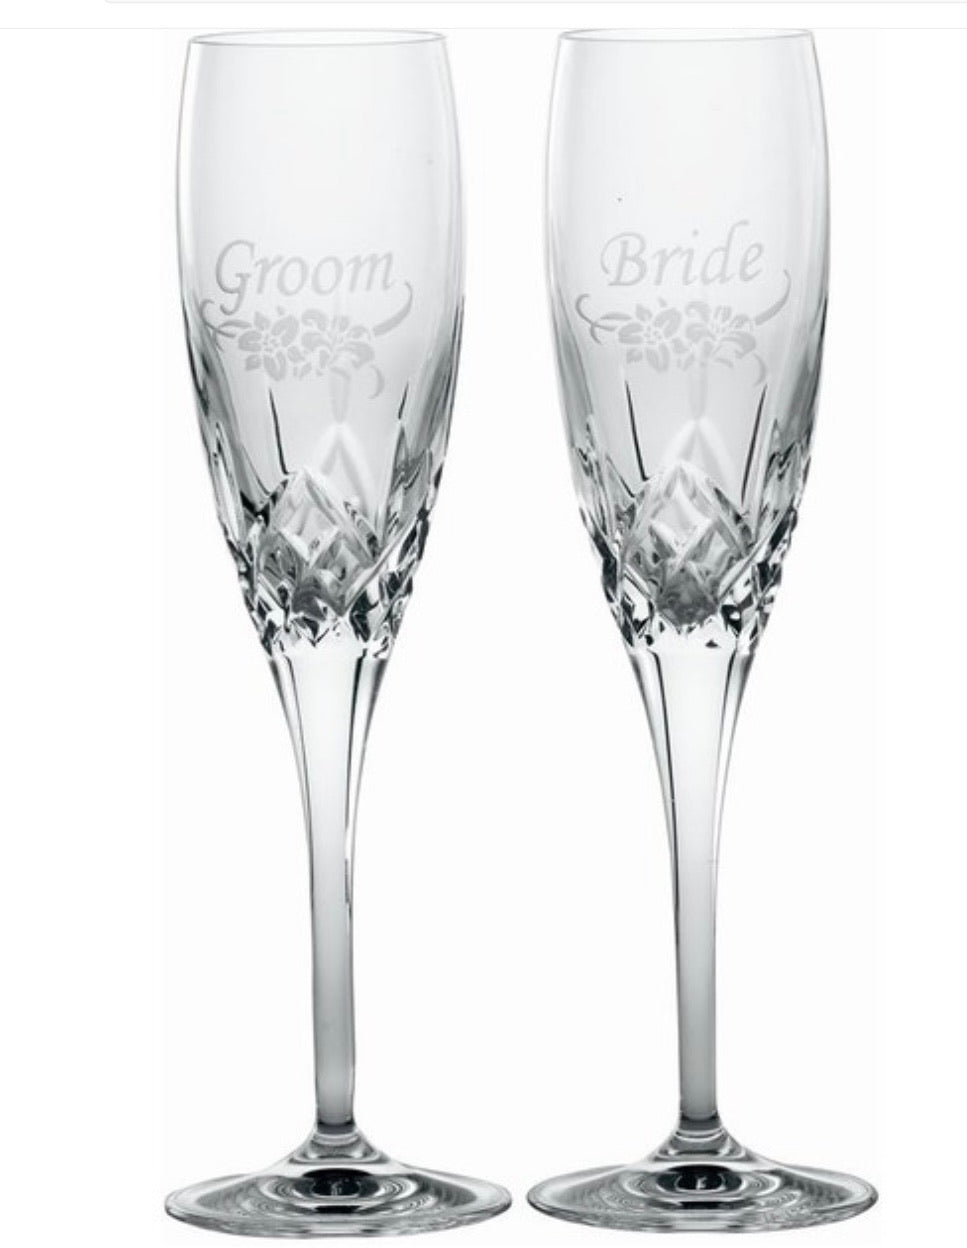 Bride and Groom floral toasting flutes G270392